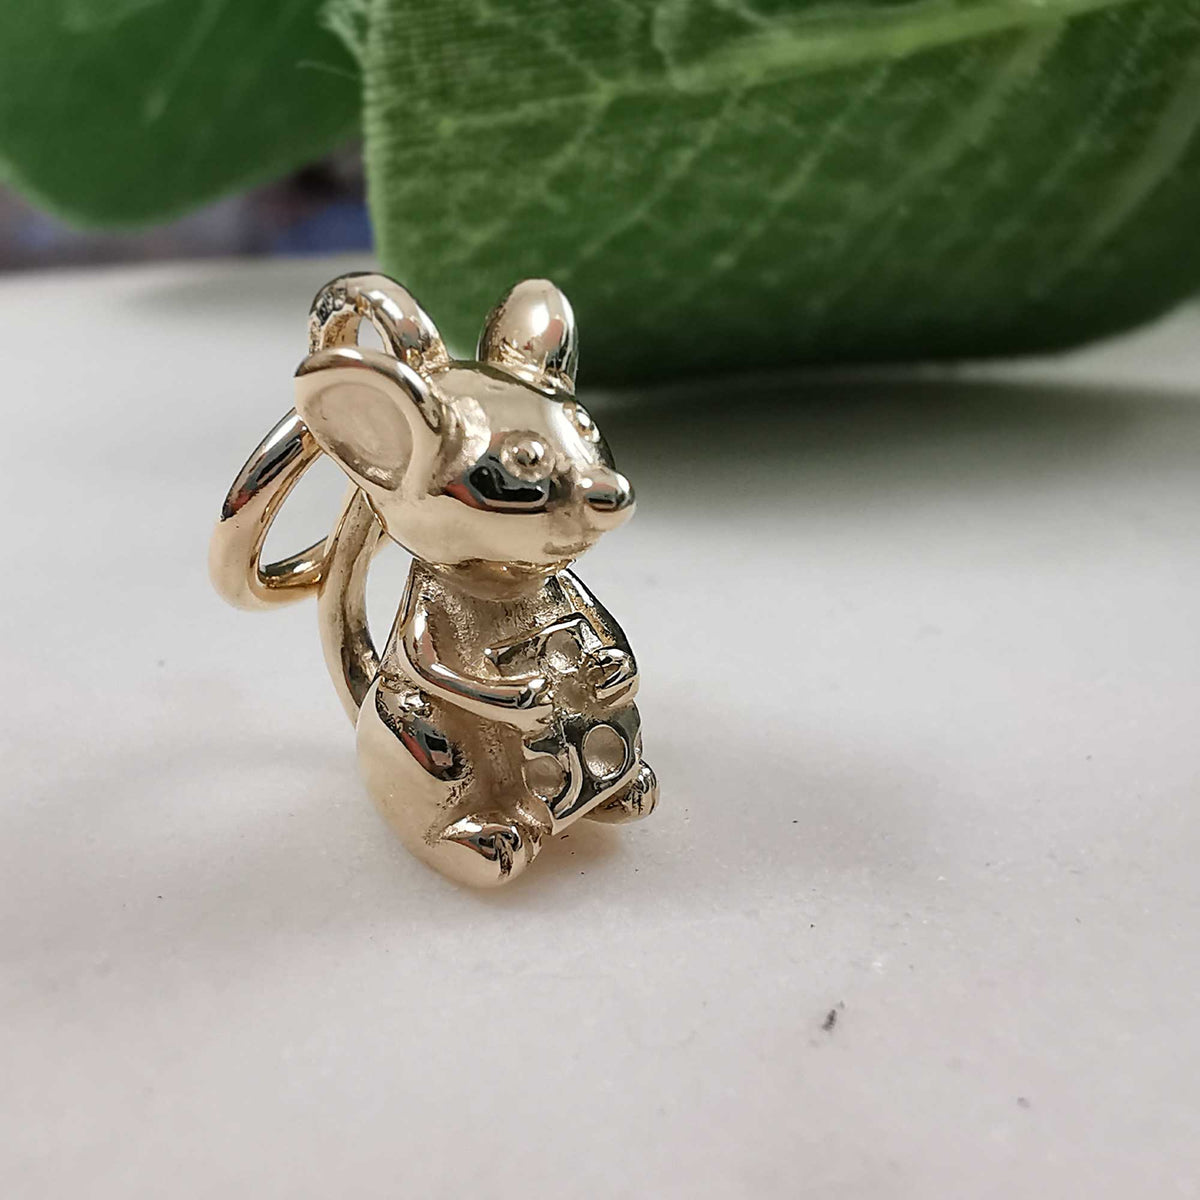 Solid gold mouse charm Scarlett Jewellery 9kt gold bracelet charms animal